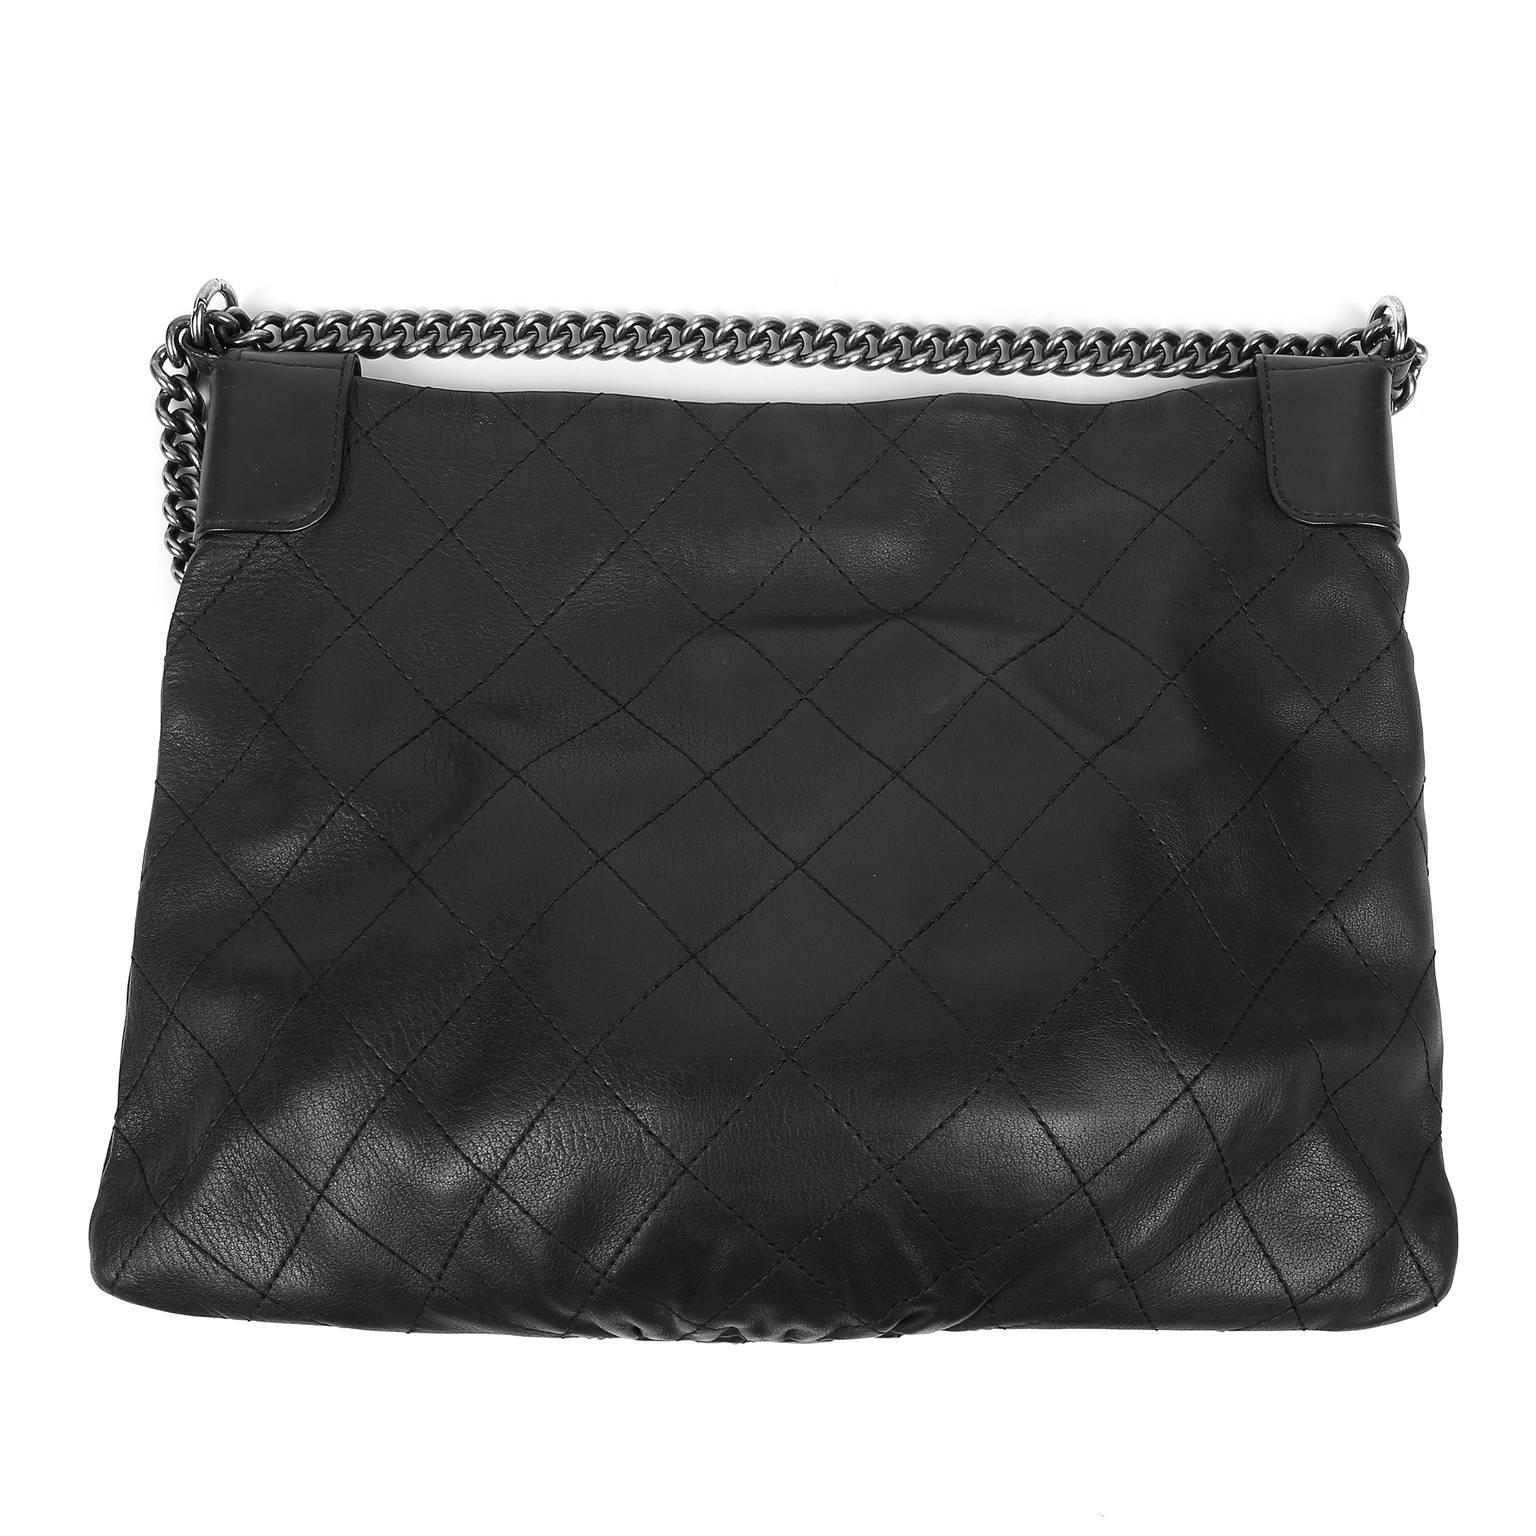 This Authentic Chanel Black Deerskin Tote is in pristine condition.   Roomy yet slim to the body, it easily carries all the essentials in style.

 Soft black deerskin is stitched in signature Chanel diamond pattern with edgy ruthenium hardware